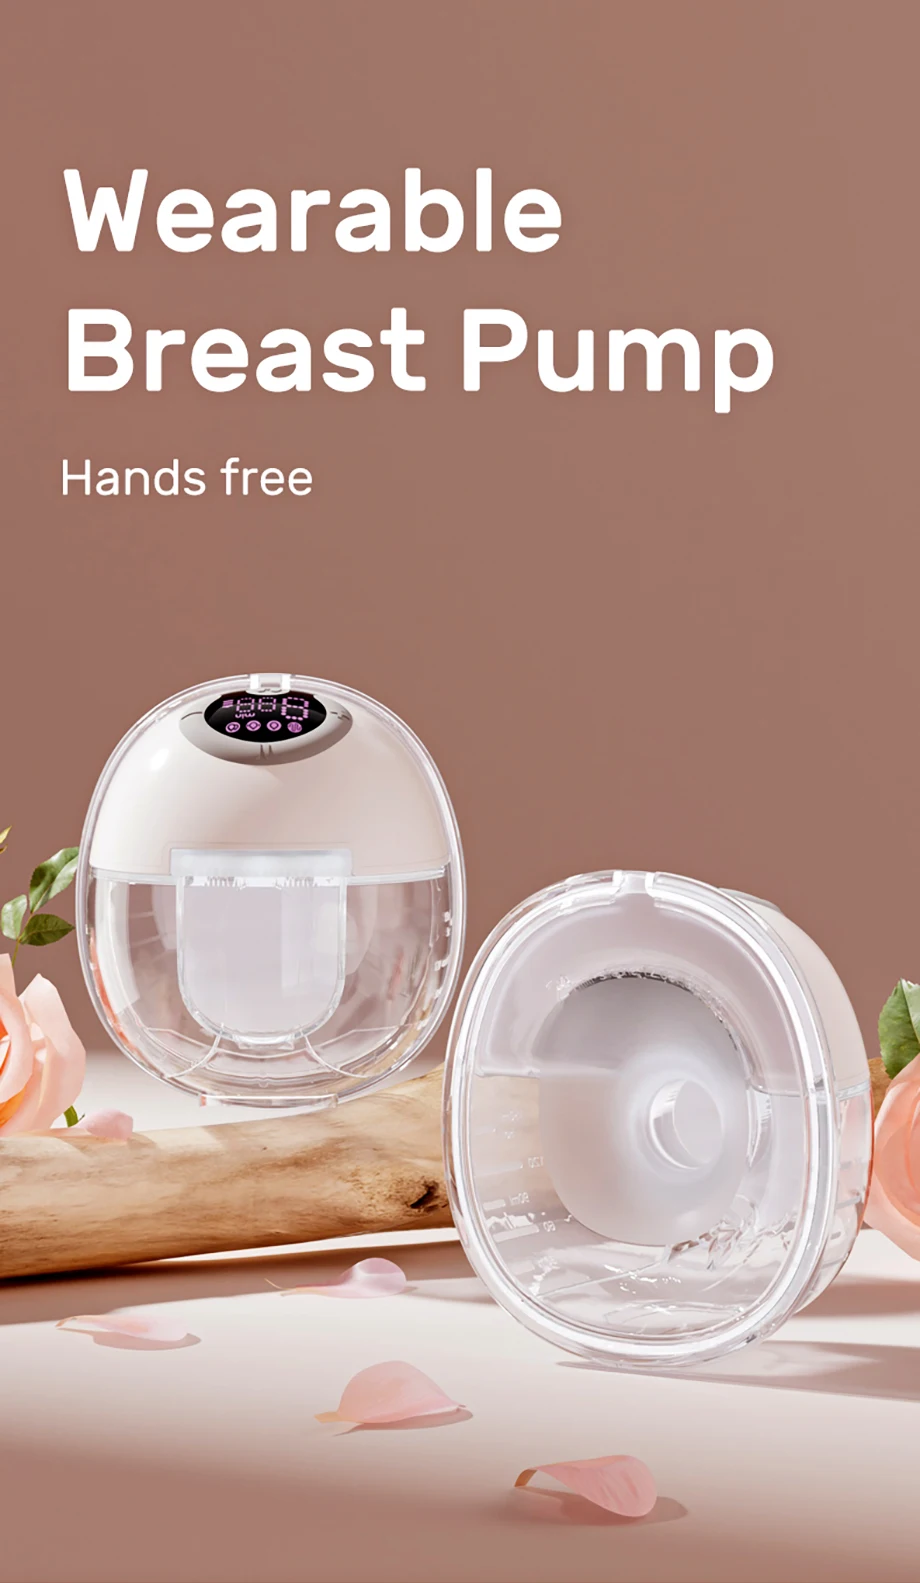 Sb96c5dac5f8942558b5943054461c39aI NCVI Wearable Breast Pump, Hands-Free Breast Pump with 4 Modes & 9 Levels, Portable Breast Pump, Low Noise & Discreet, 24mm